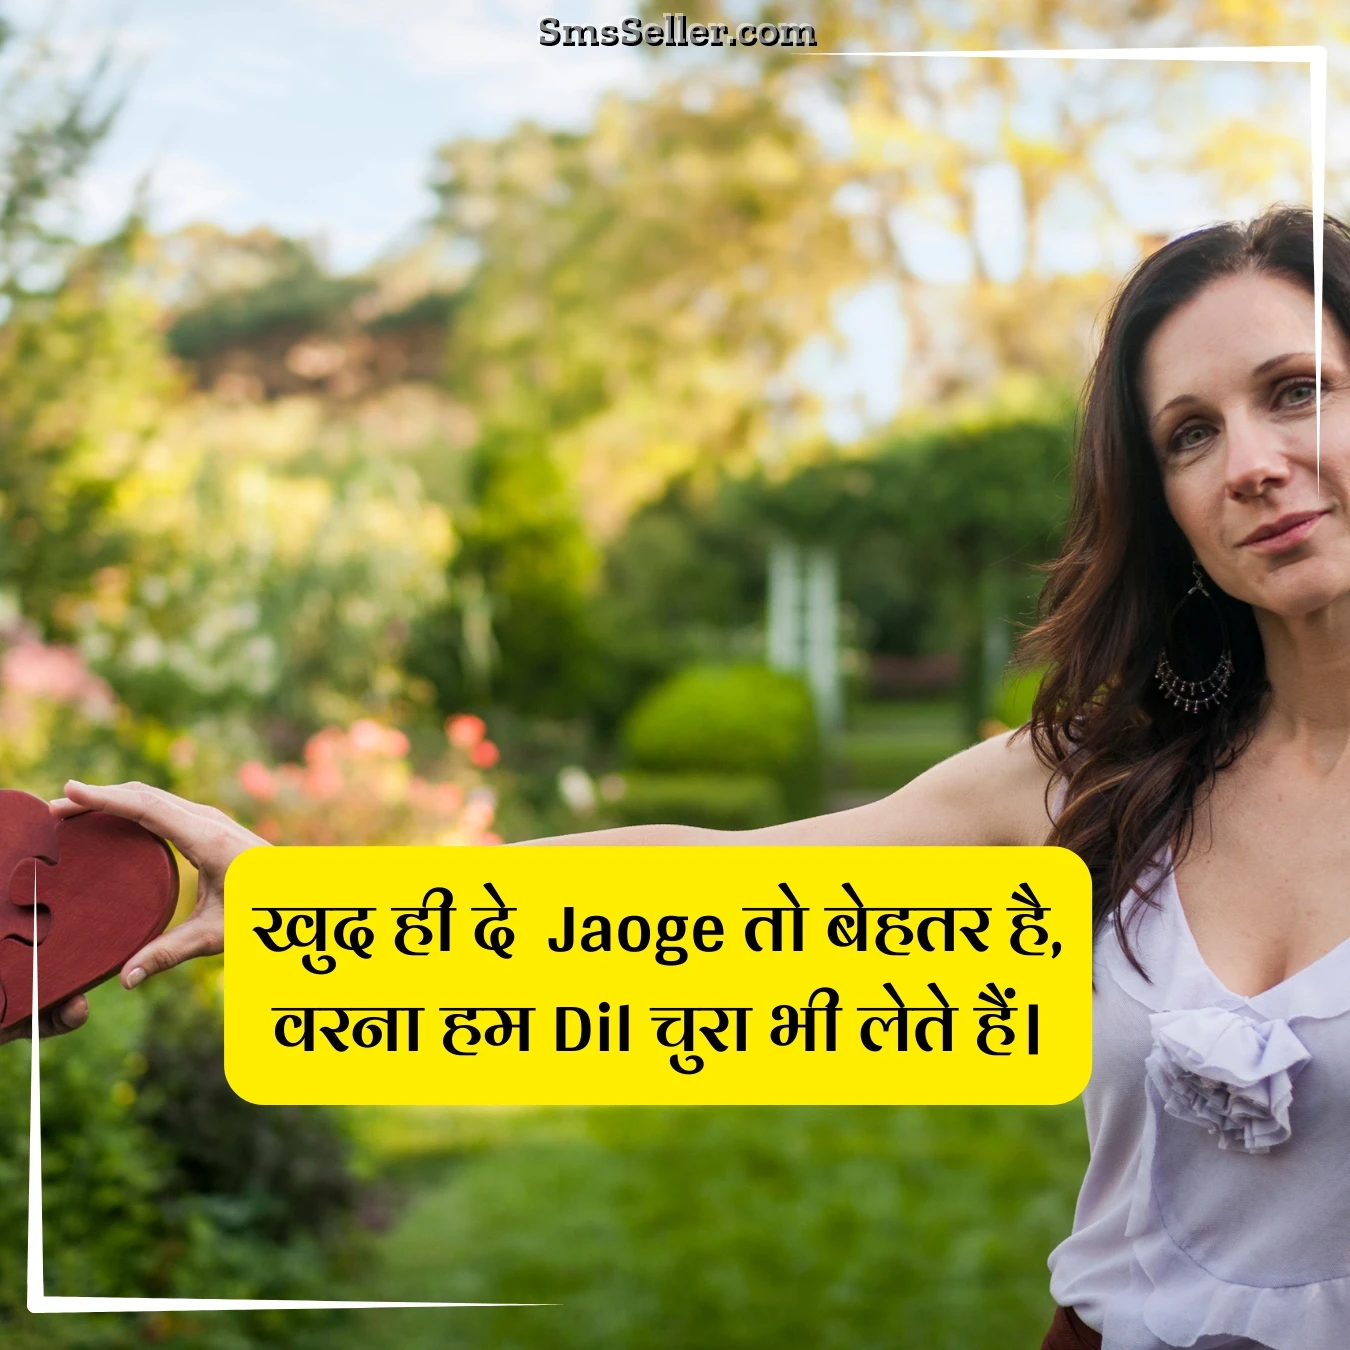 status in hindi will give yourself khud de jaogai